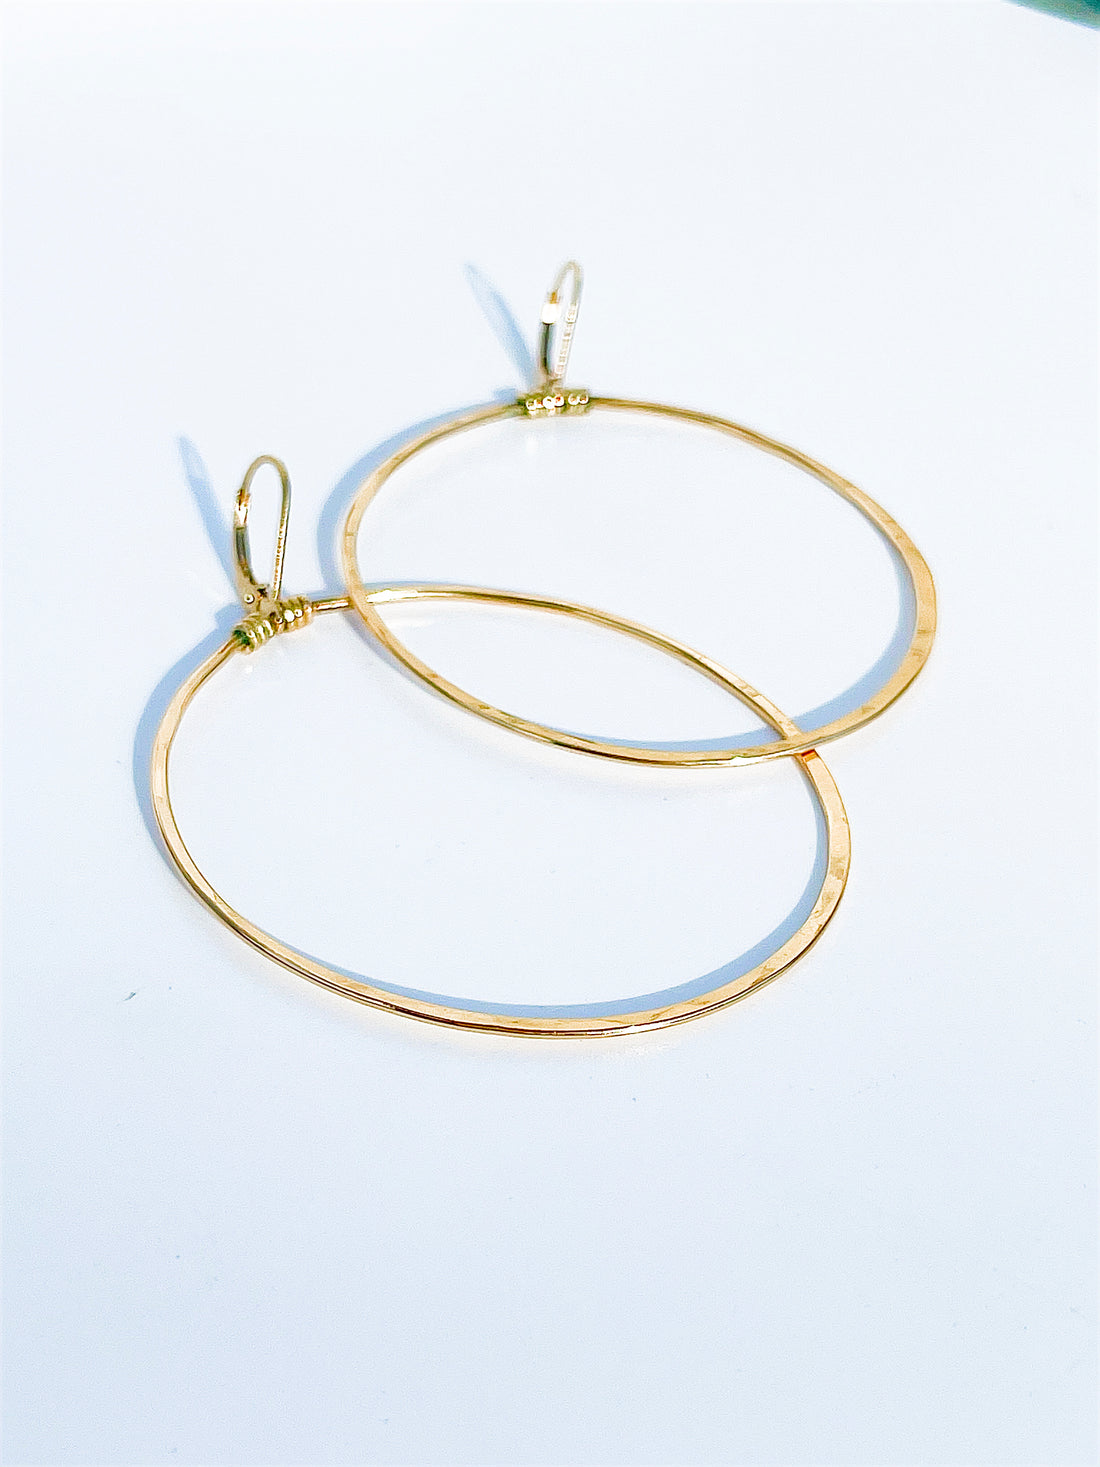 2 1/2&quot; X 1 1/2&quot; Dainty, oval hoop earrings that hang down from a lever back ear wire 